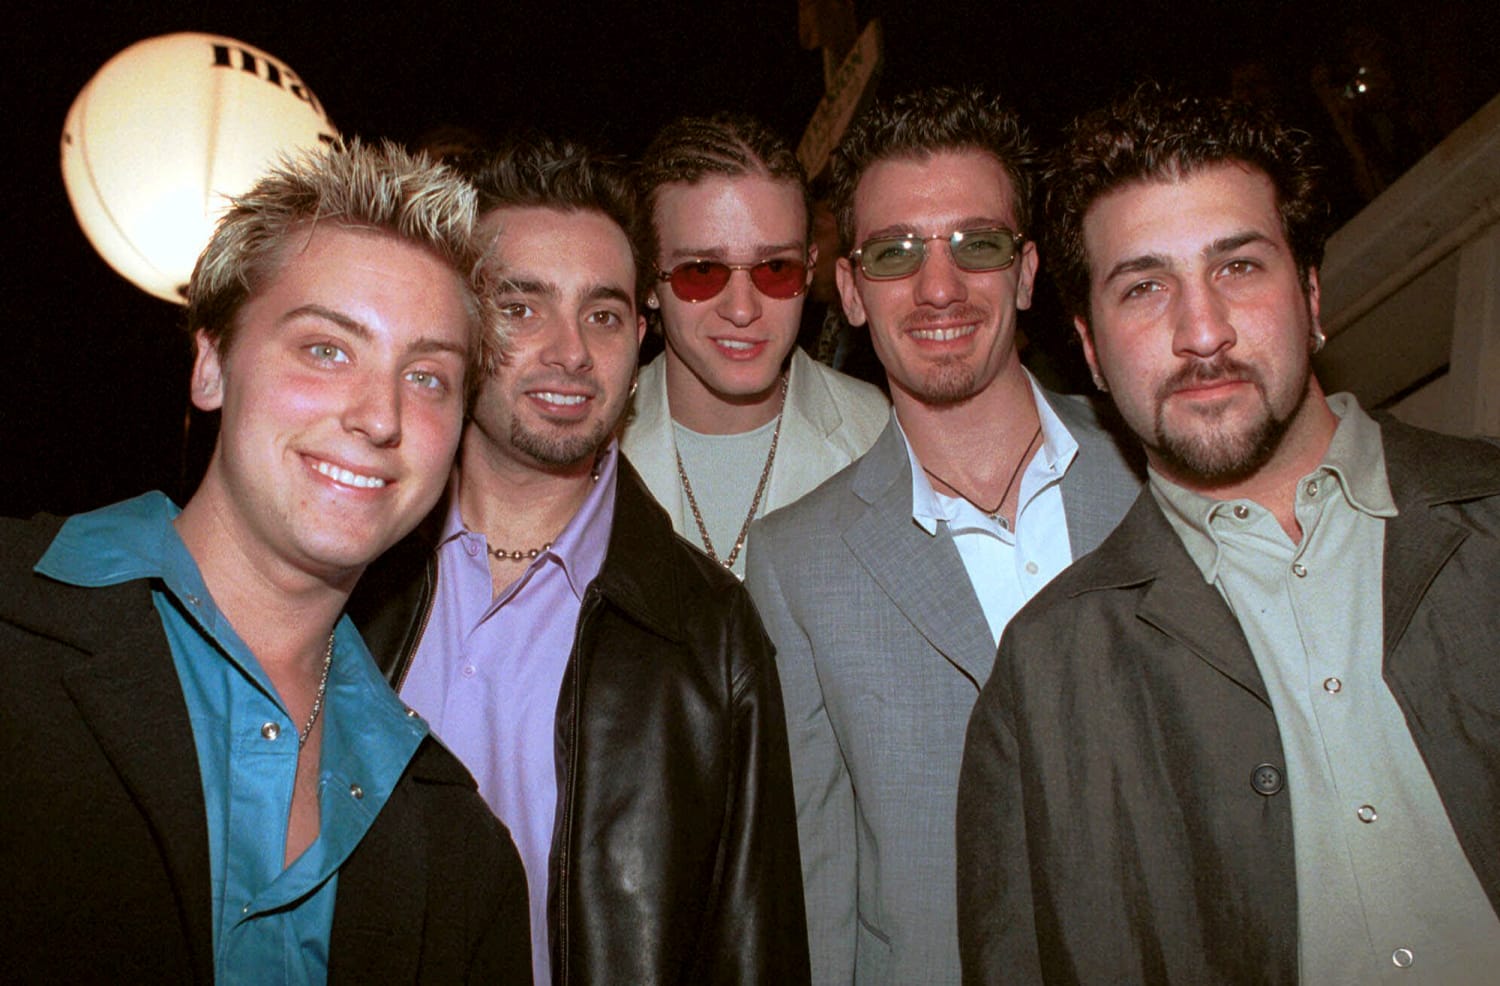 Justin Timberlake turns 35: Celebrate with this awesome 'NSync